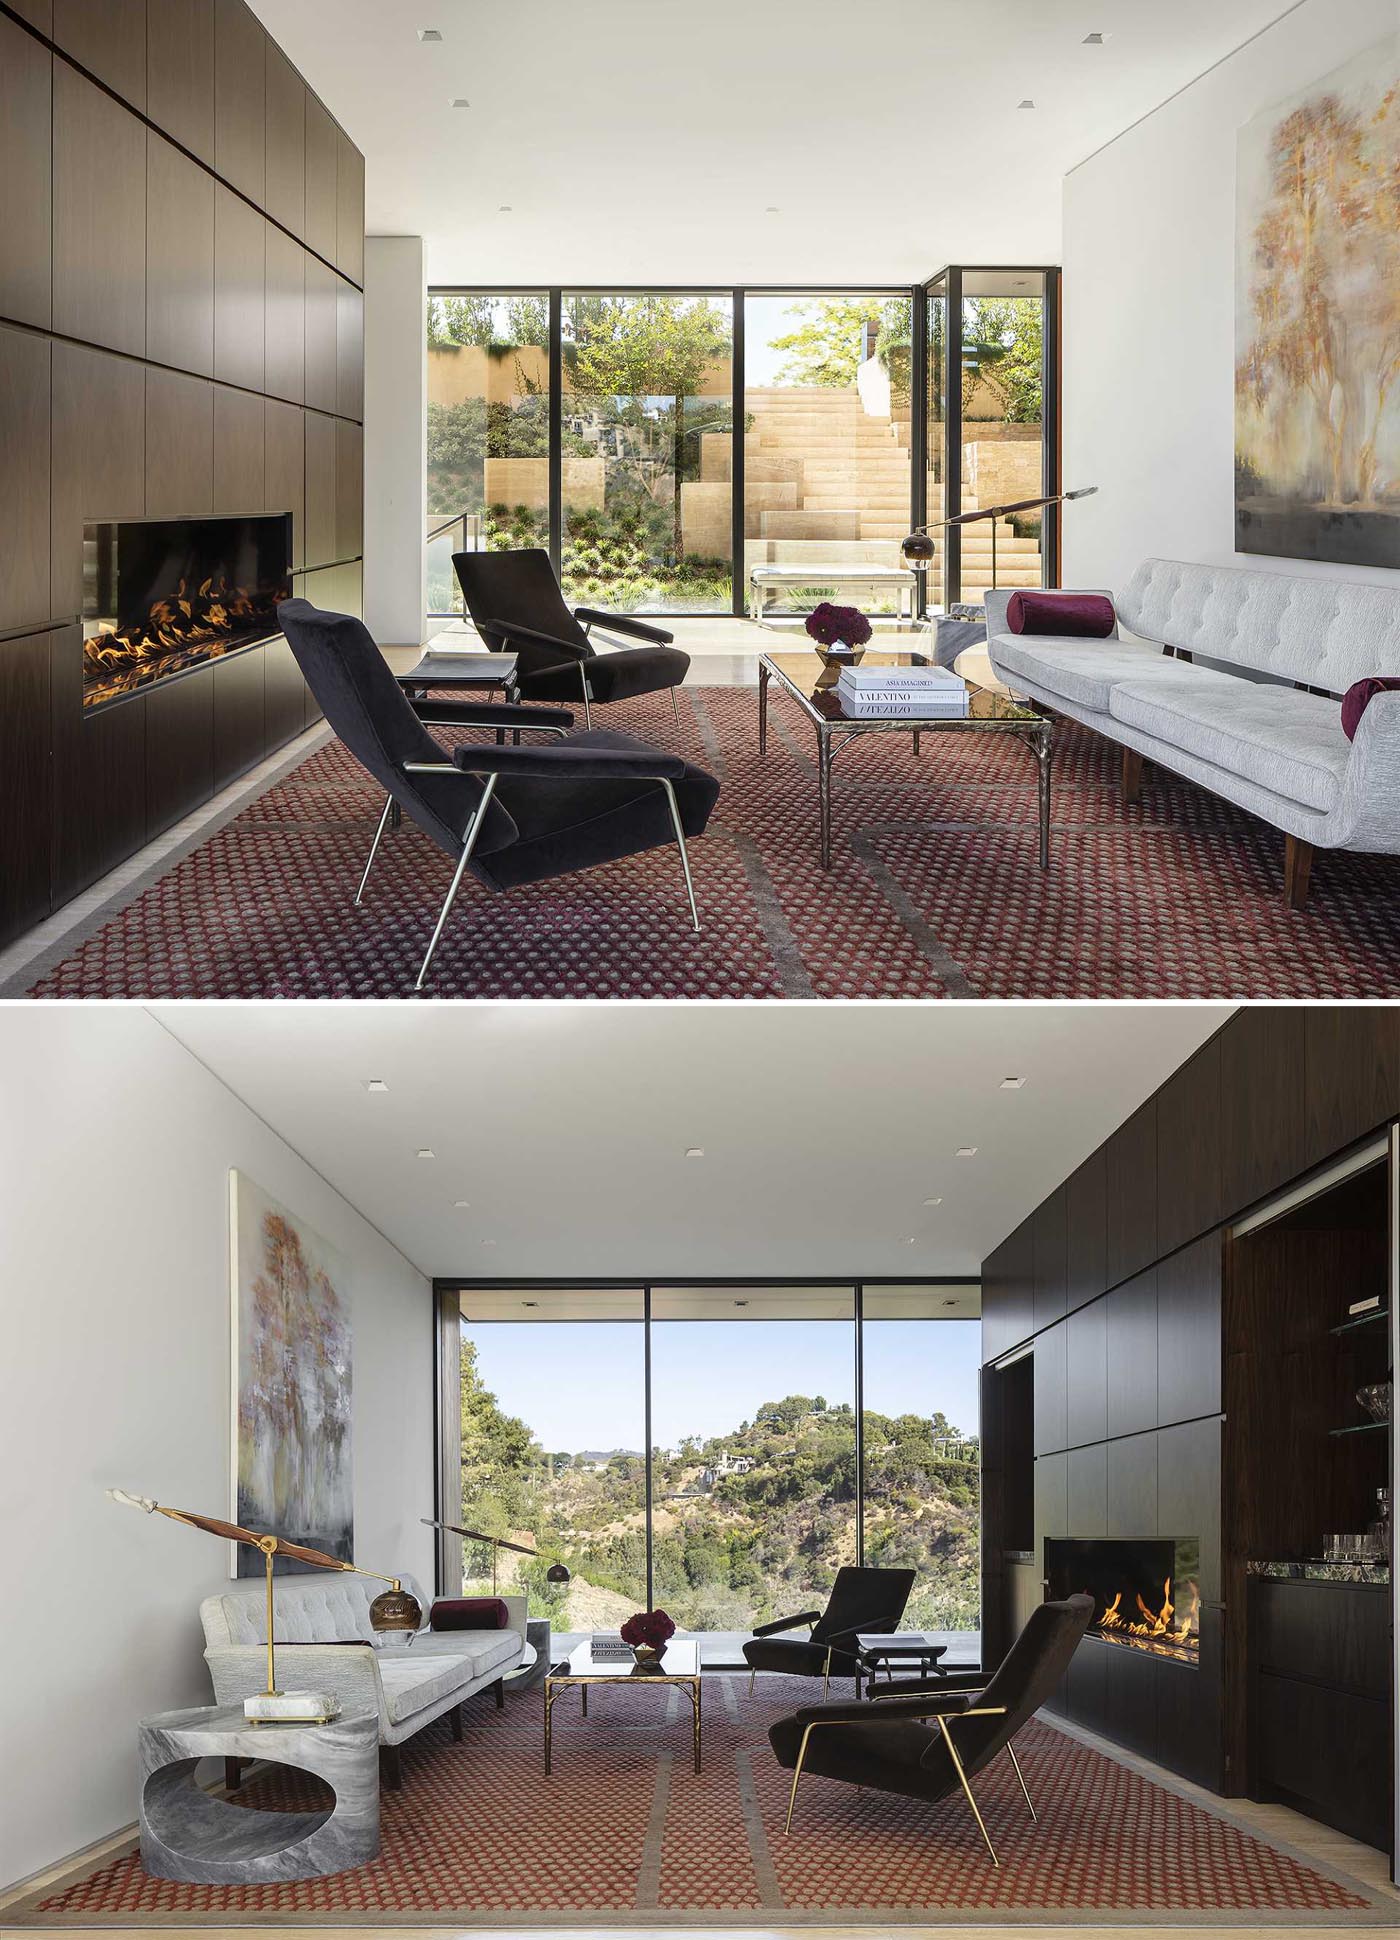 A modern reception room with a fireplace, and views of the terrace garden and canyon.